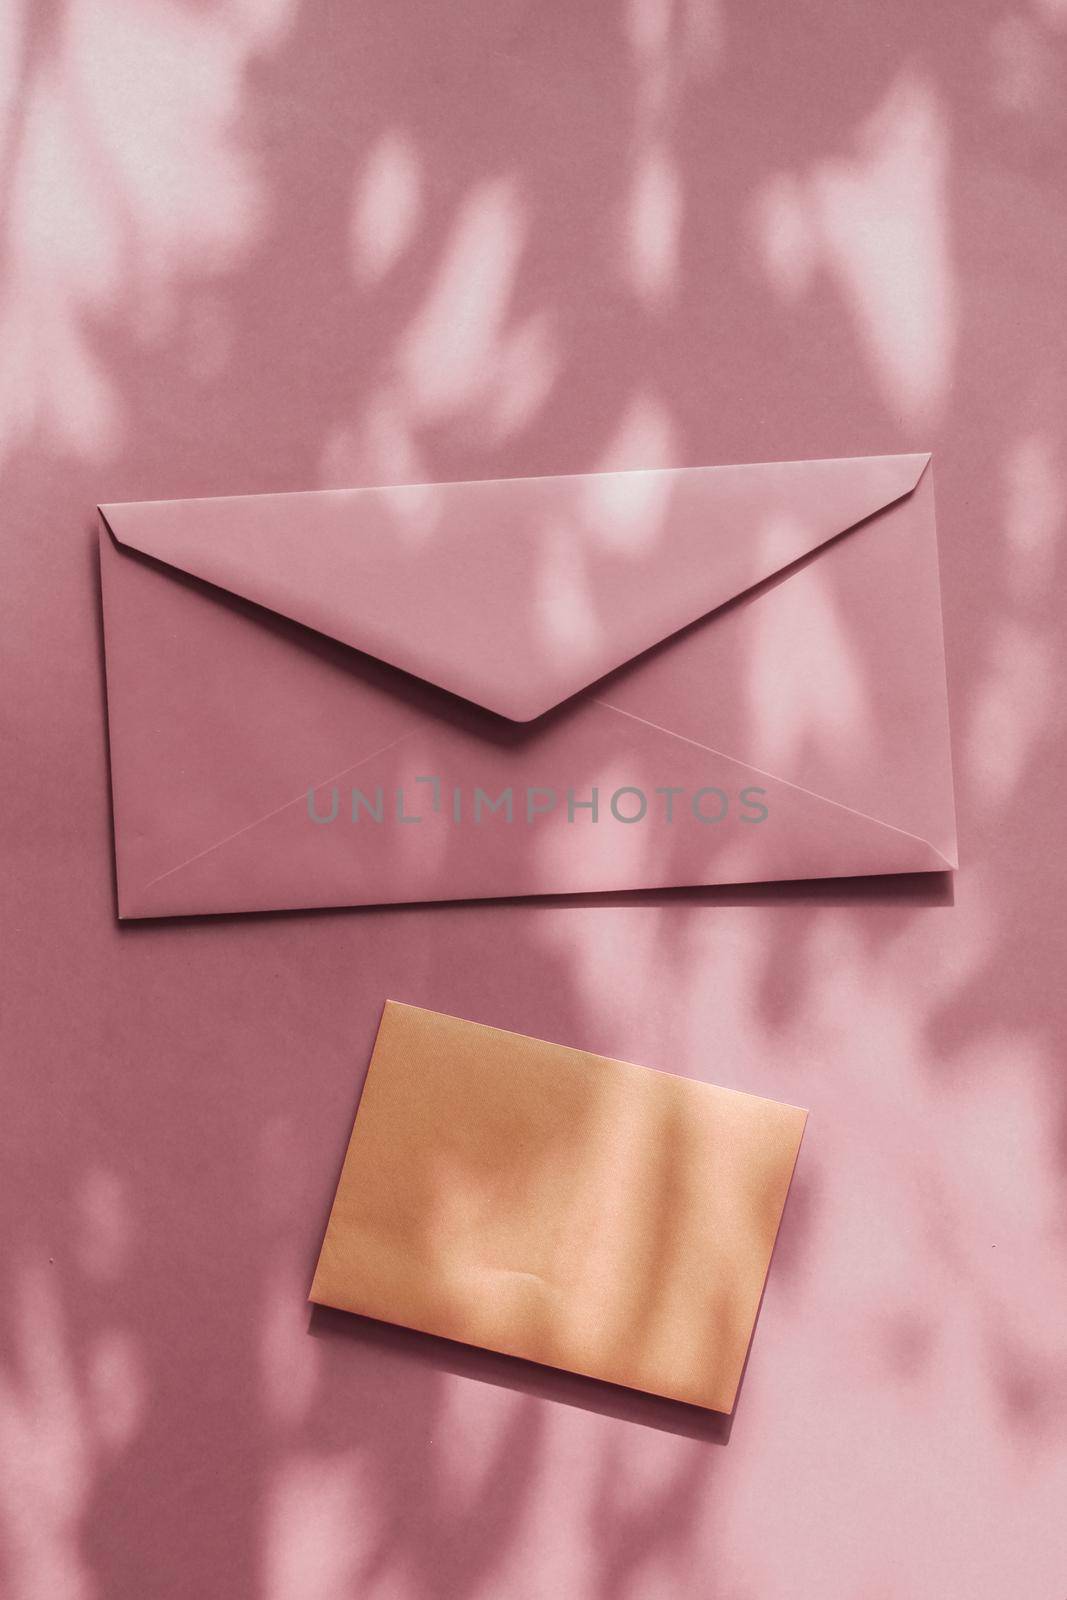 Beauty brand identity as flatlay mockup design, business card and letter for online luxury branding on pastel shadow background by Anneleven